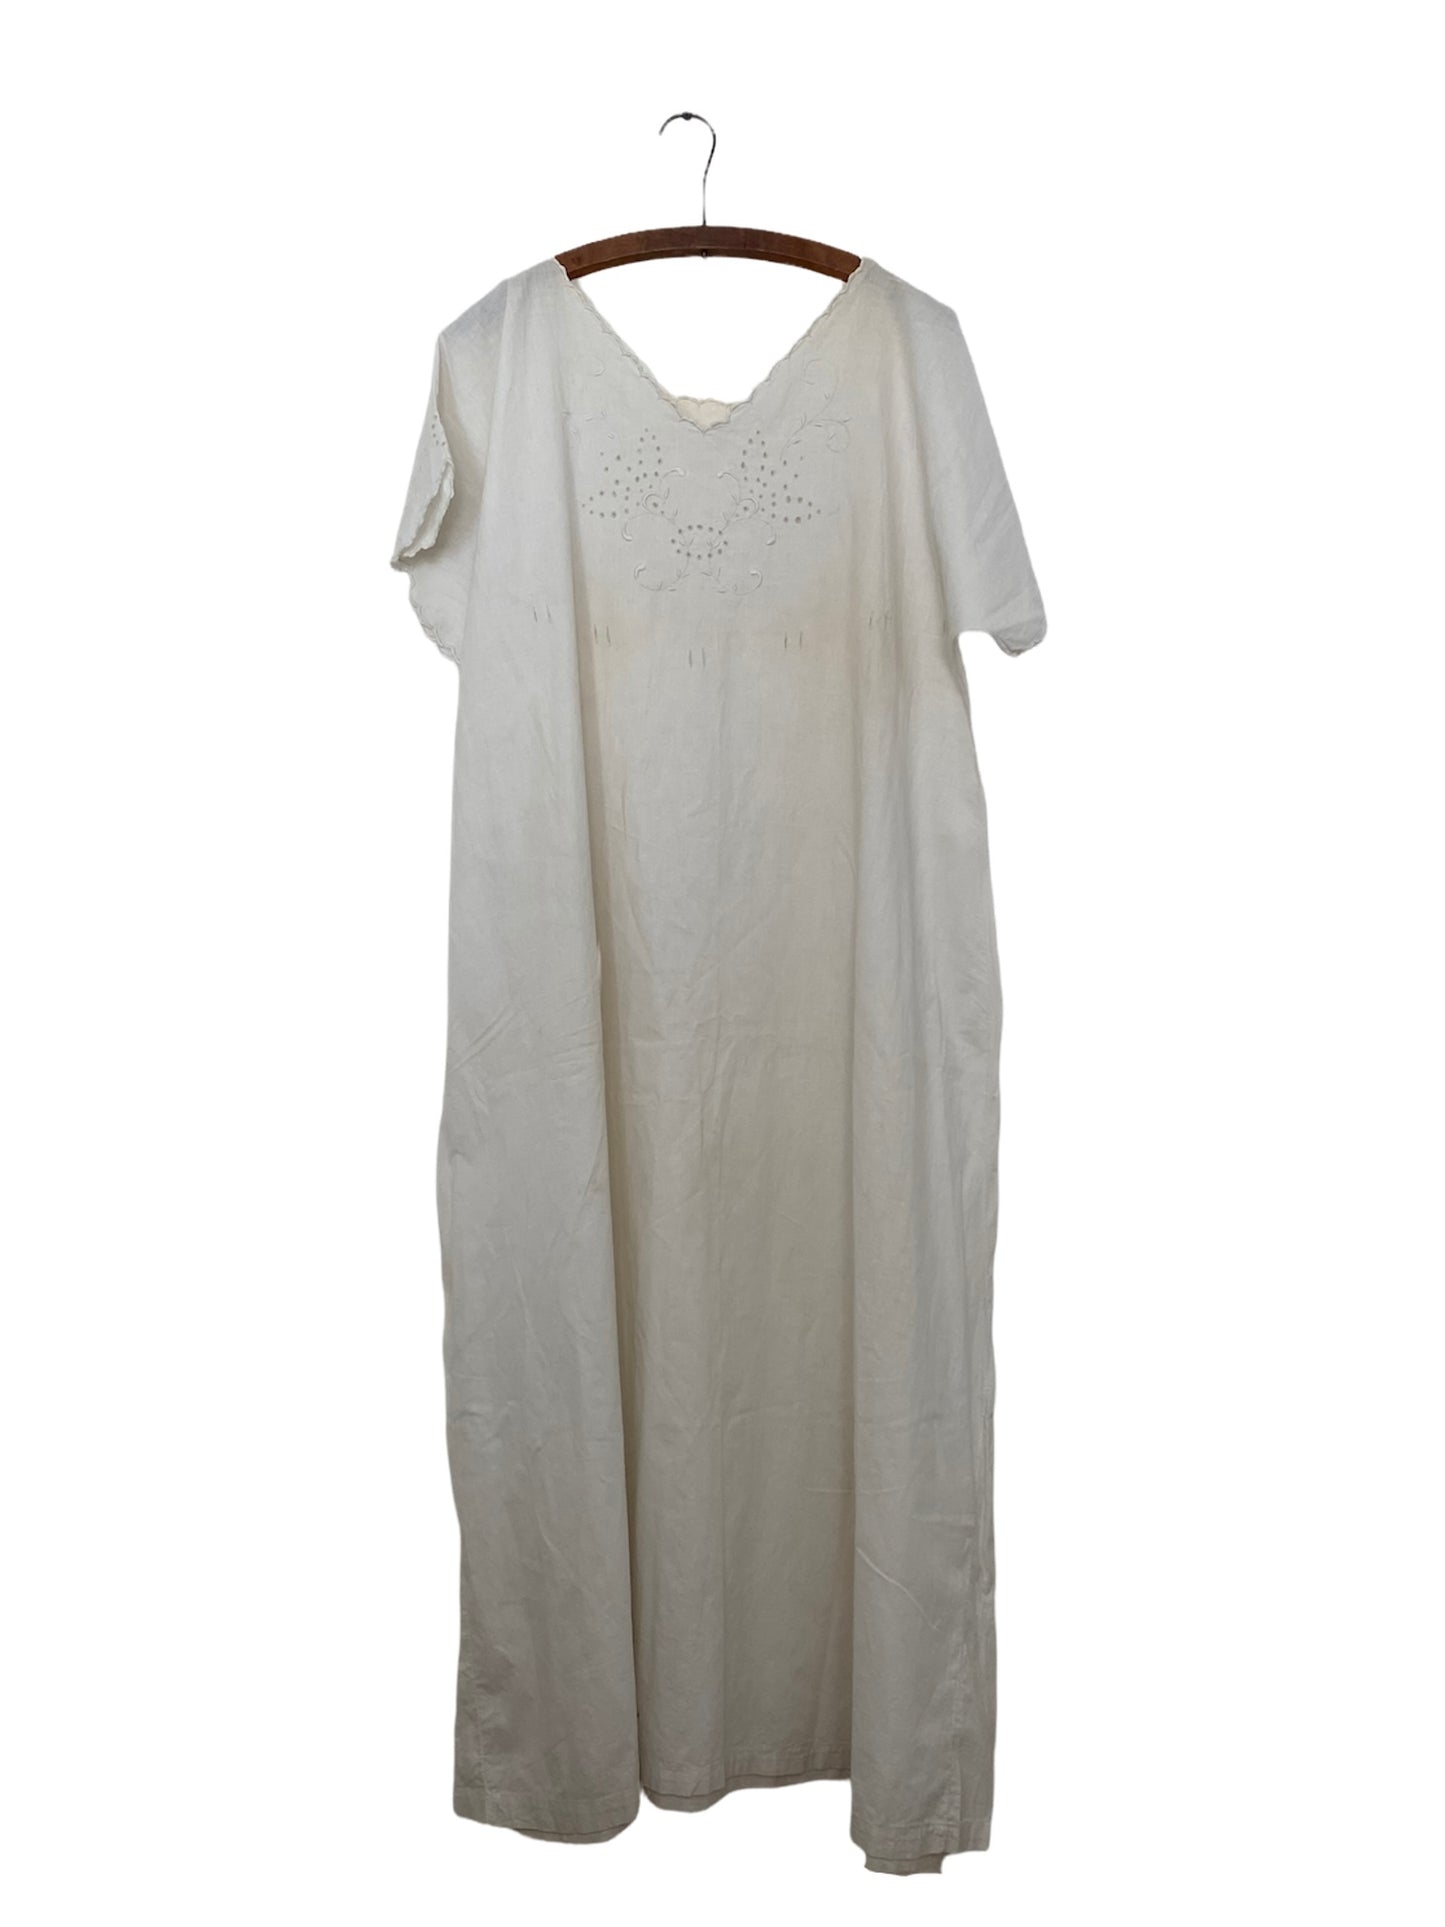 Antique Embroidered Nightgown